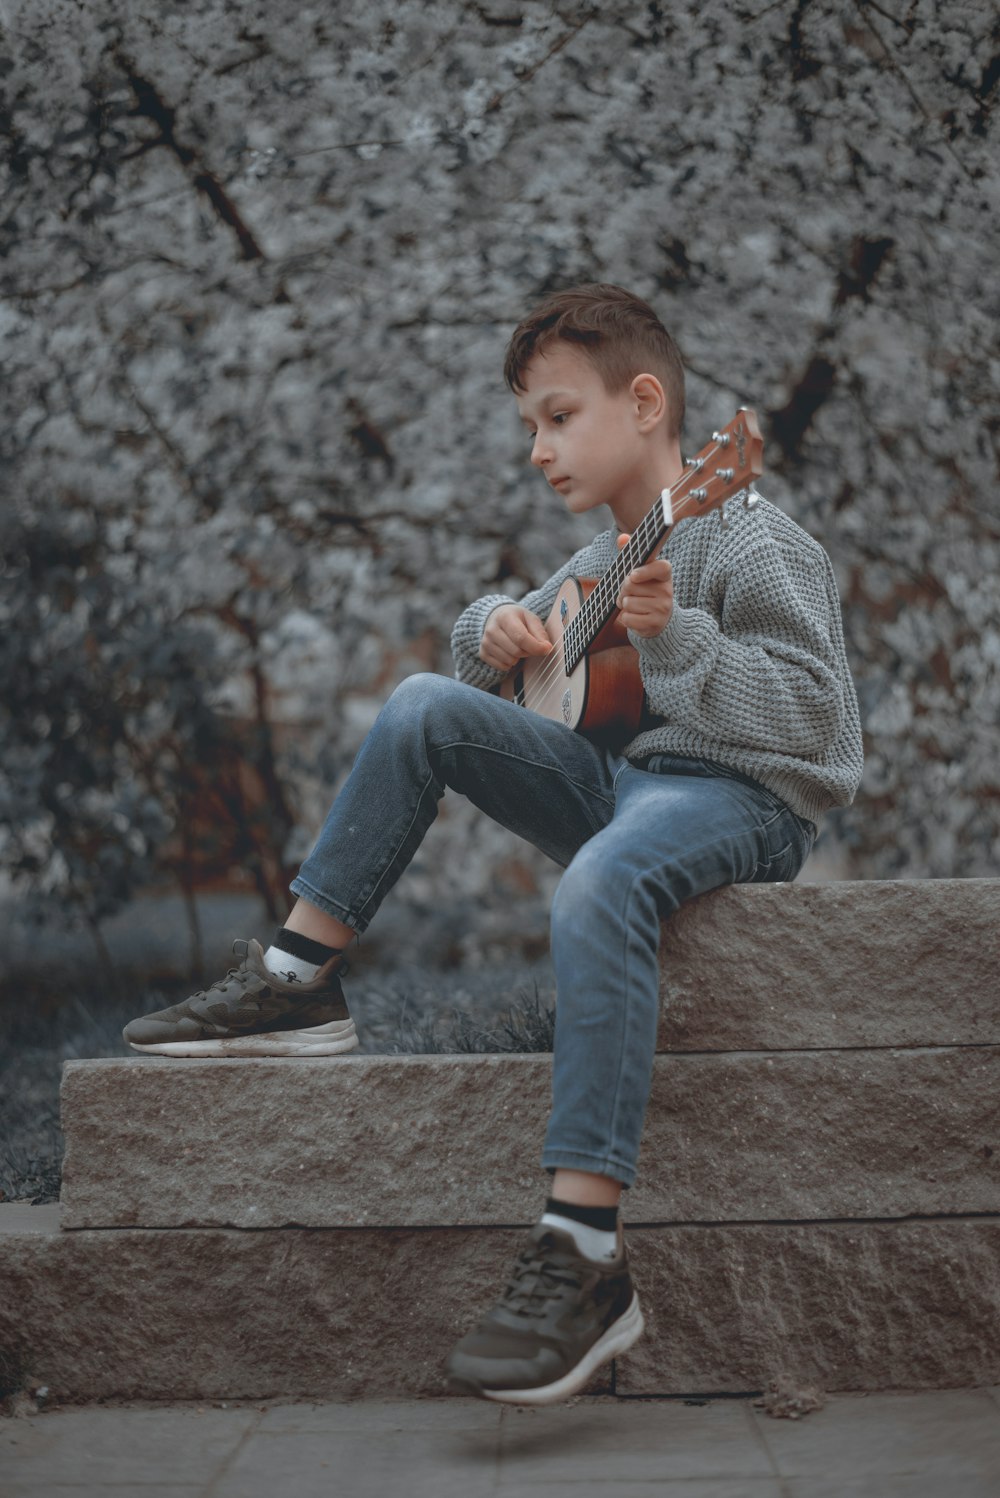 a young boy sitting on a ledge playing a guitar